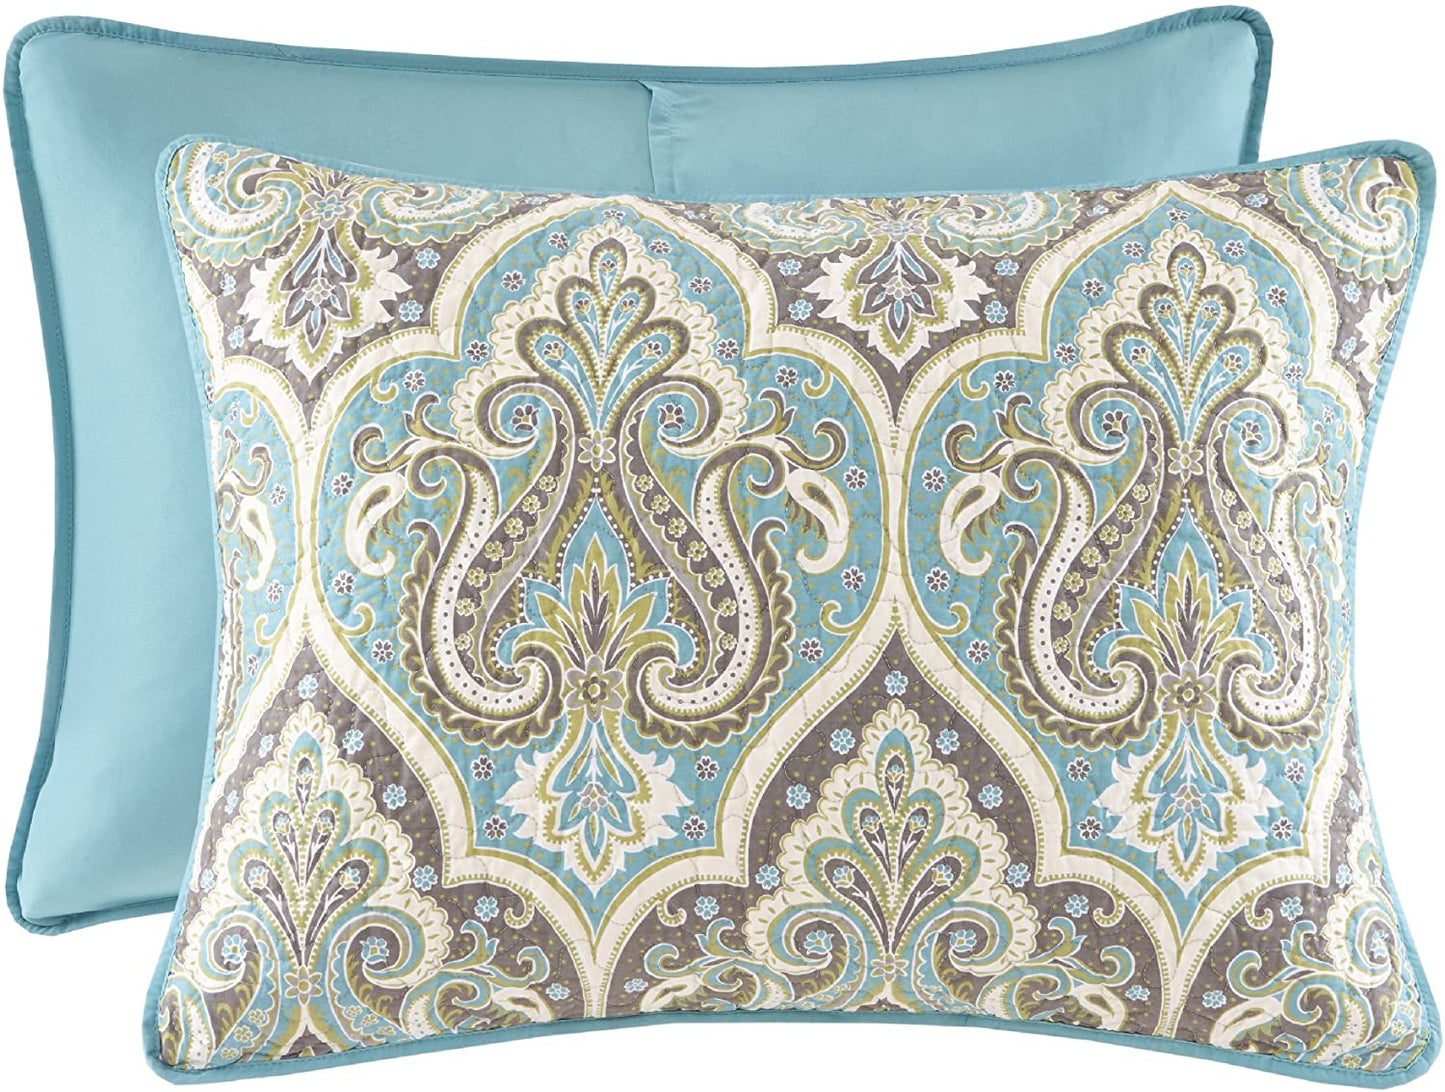 Wongs Bedding Teal Paisley Design3 Pieces Quilt Set With 2 Pillowcases